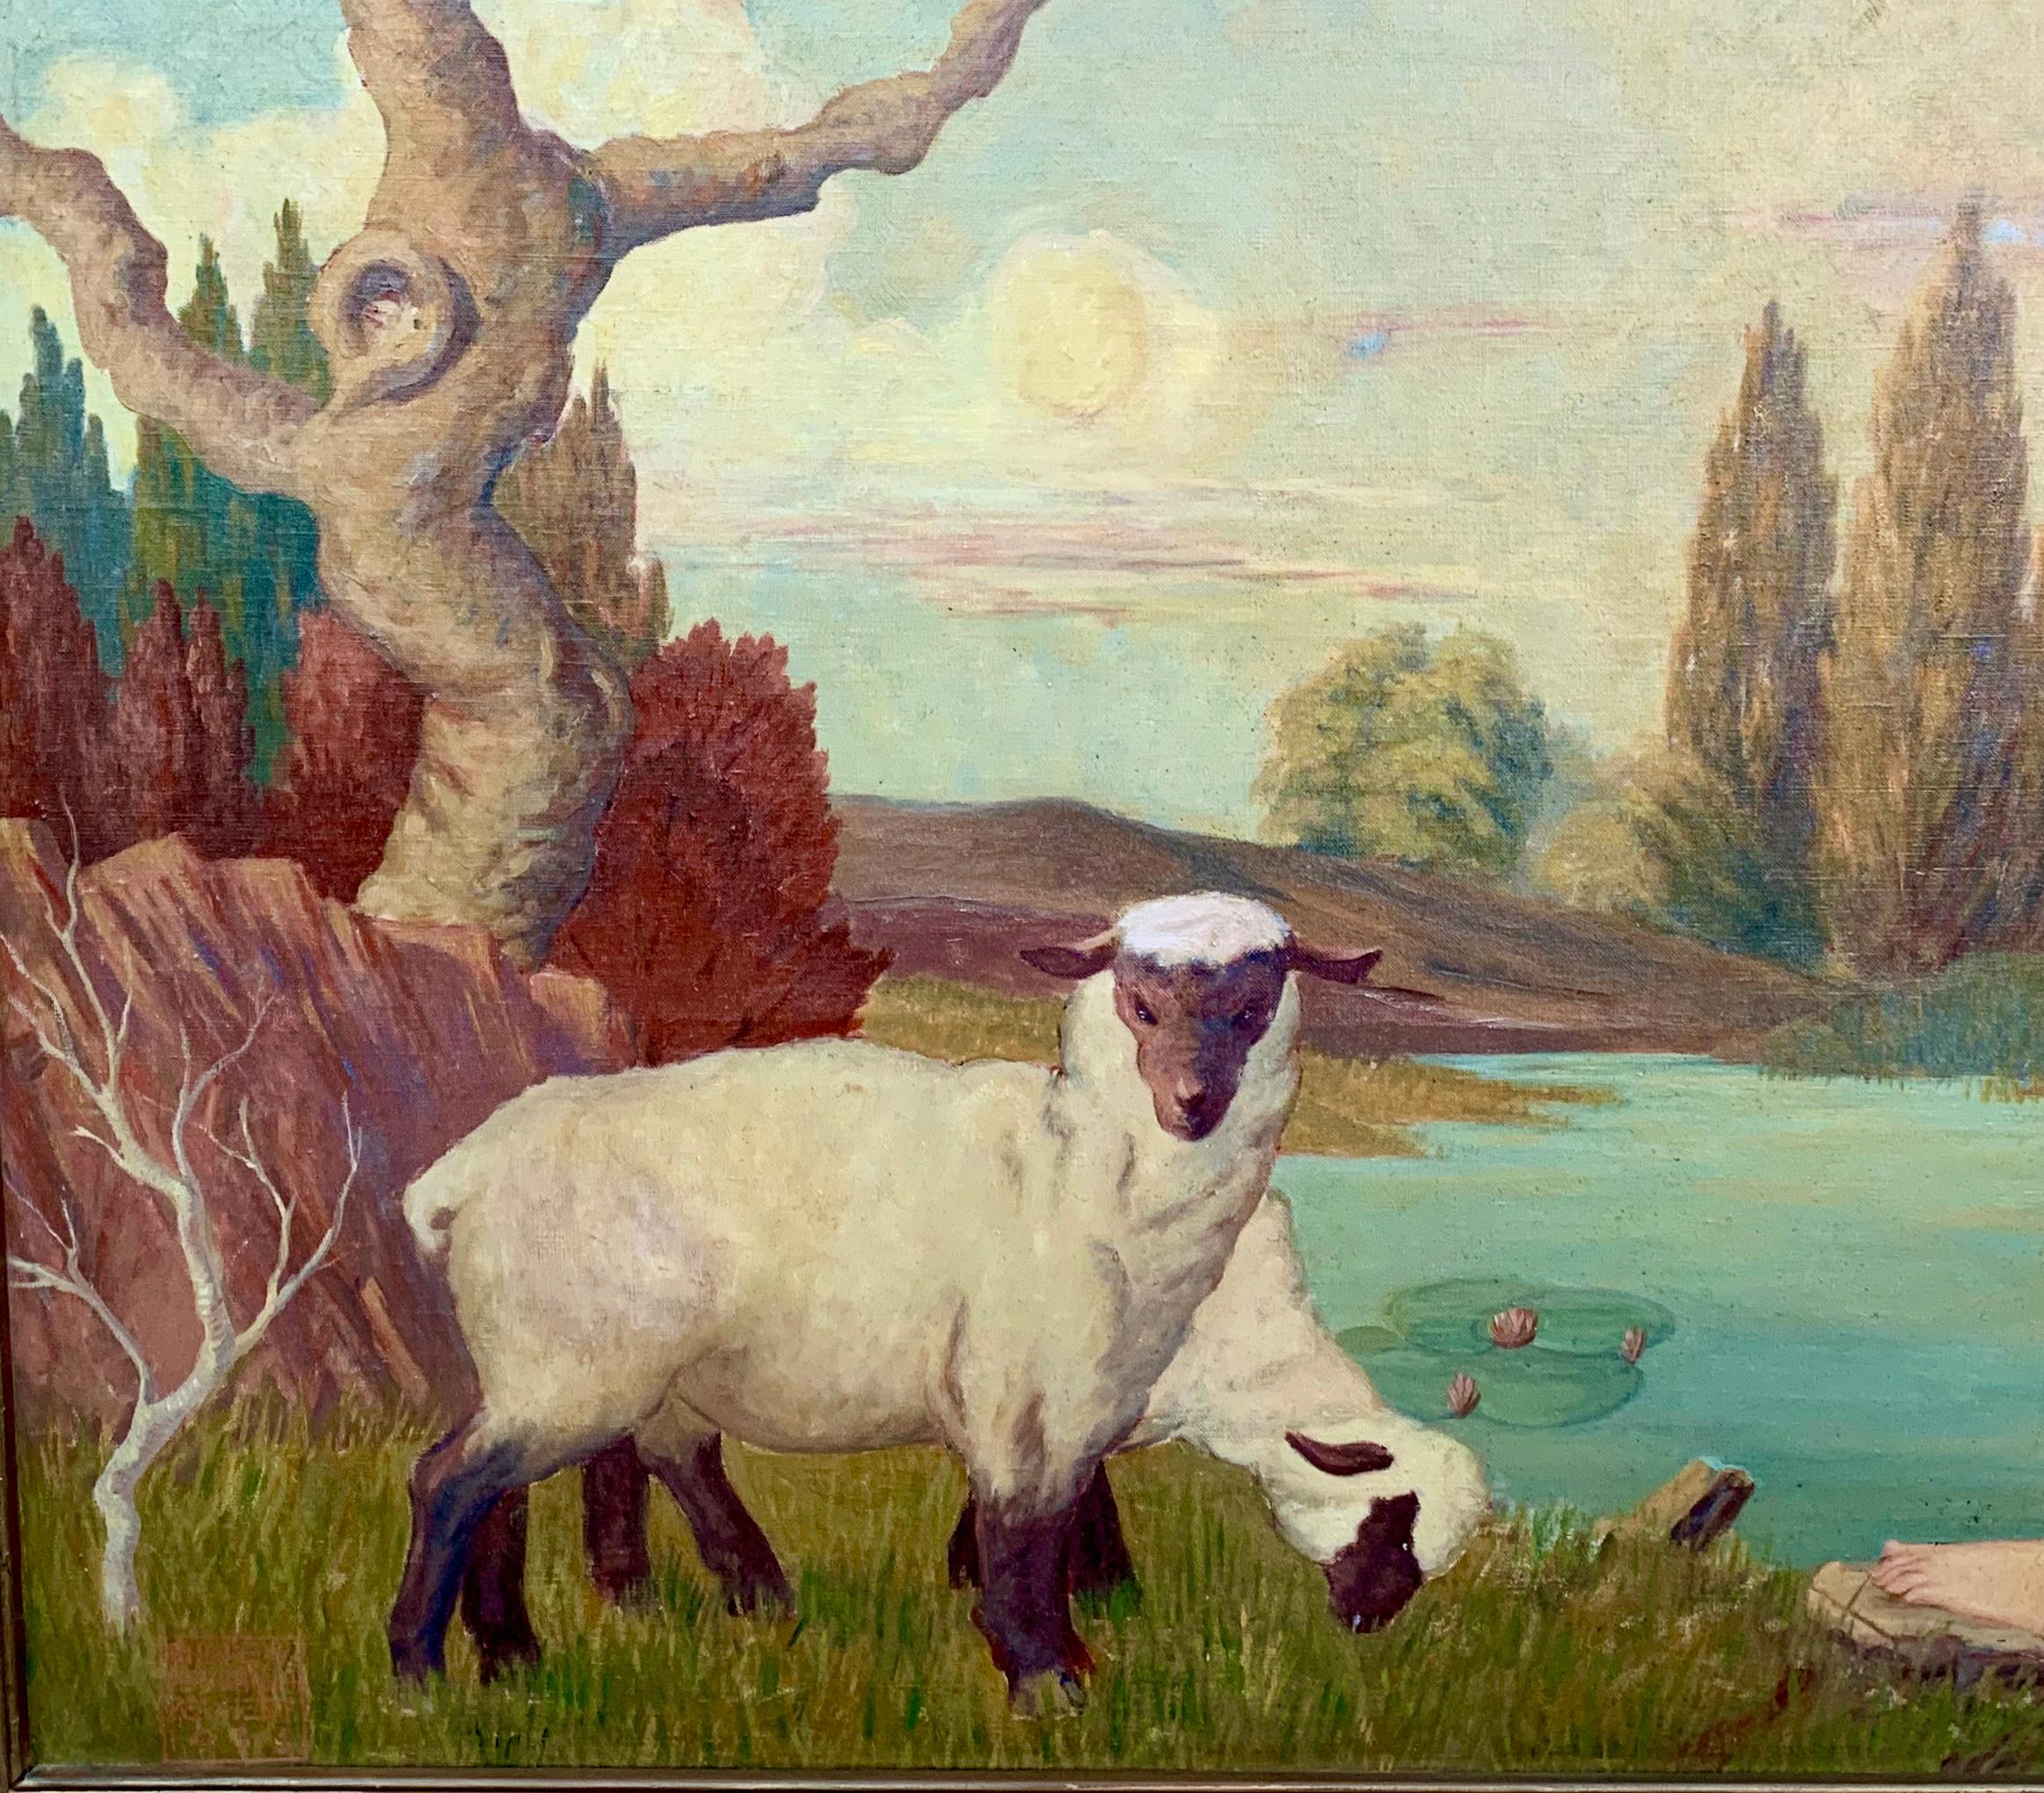 American Art Deco Mural Sensual Red Head Nude Woman in a Landscape with Sheep - Art Nouveau Painting by Andrew Benjamin Kennedy